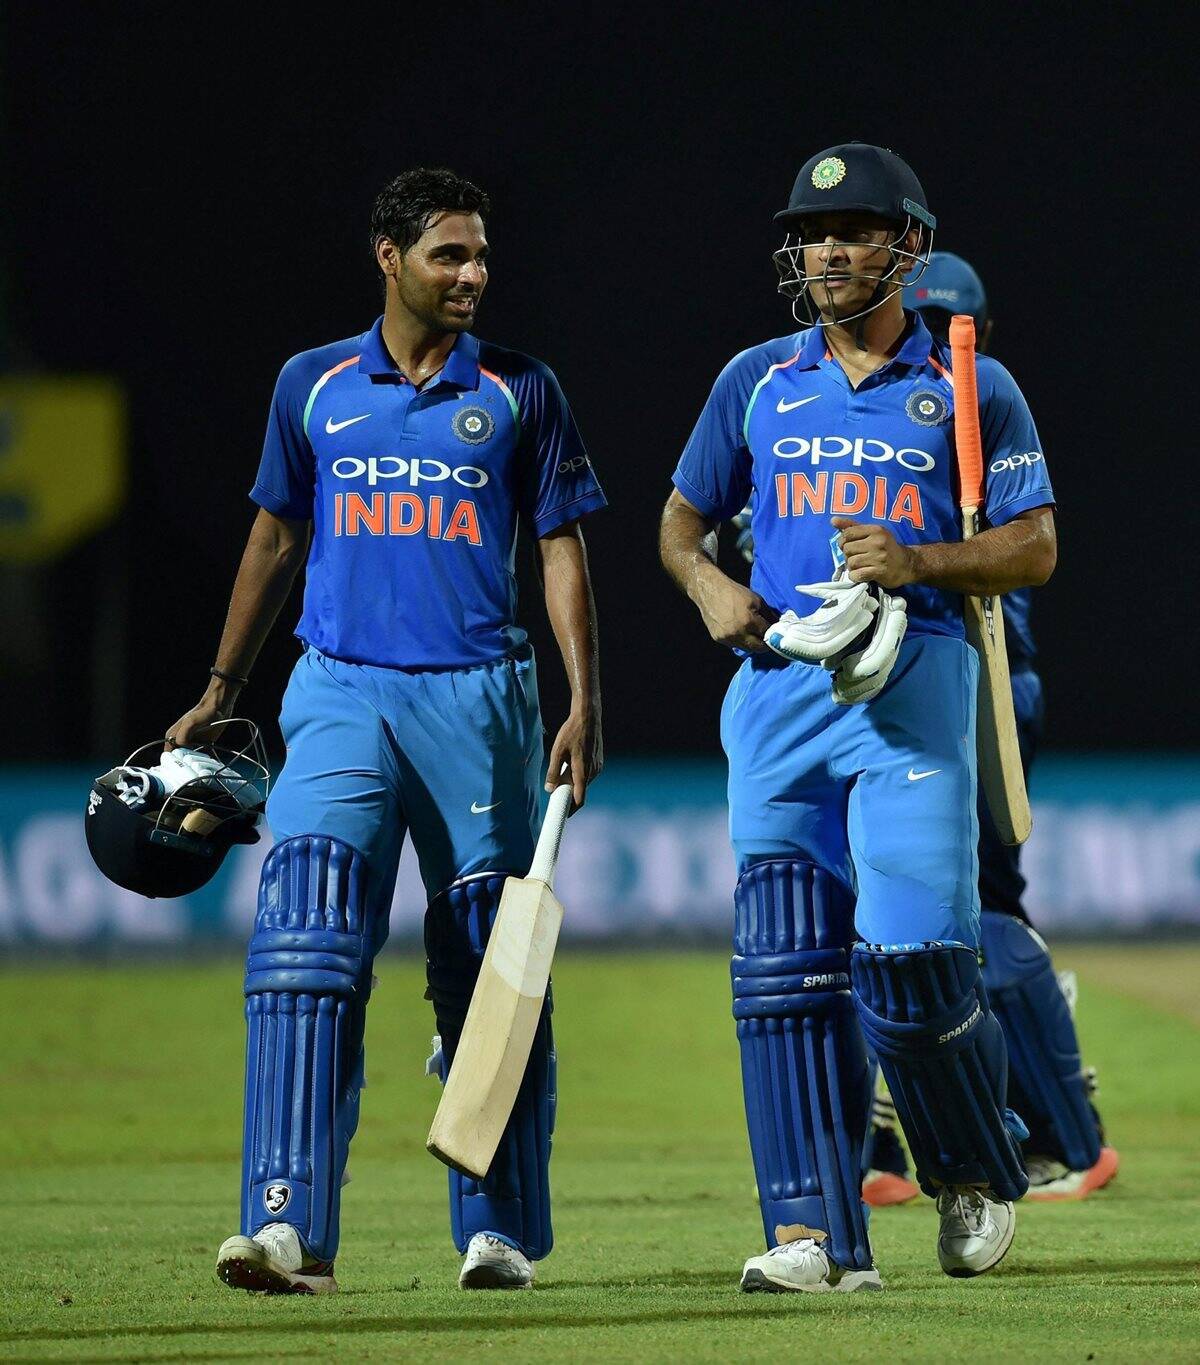 Bhuvneshwar Kumar lauds MS Dhoni in a video shared by BCCI